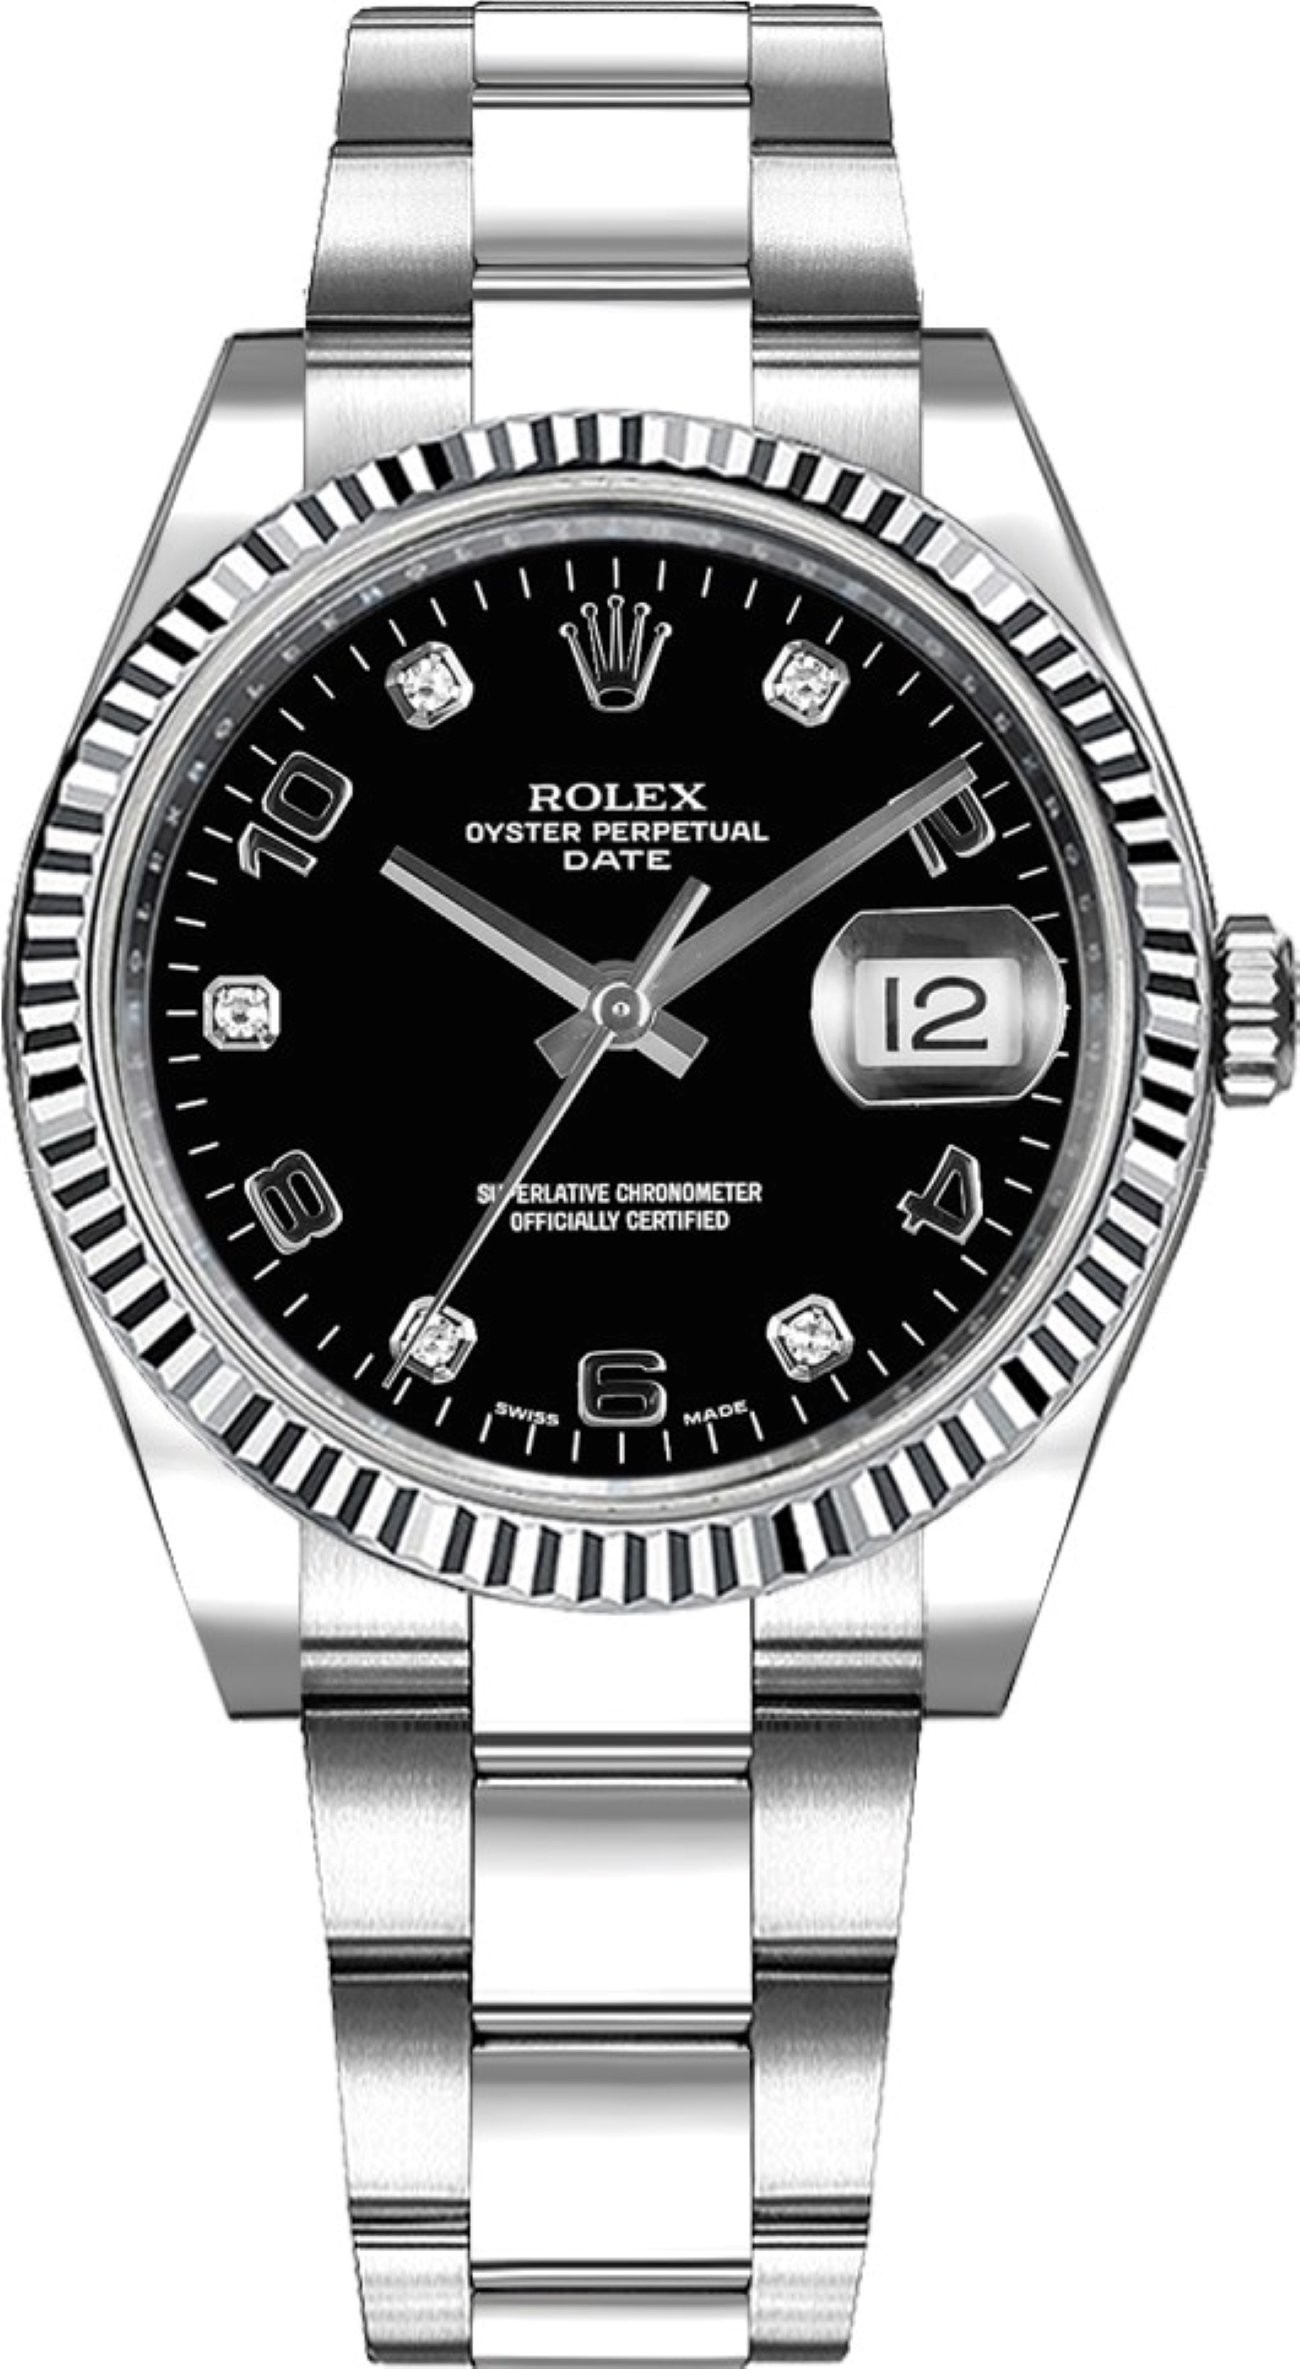 ROLEX OYSTER PERPETUAL DATE 34MM BLACK GOLD BLACK DIAL STEEL AUTOMATIC REF: 115234